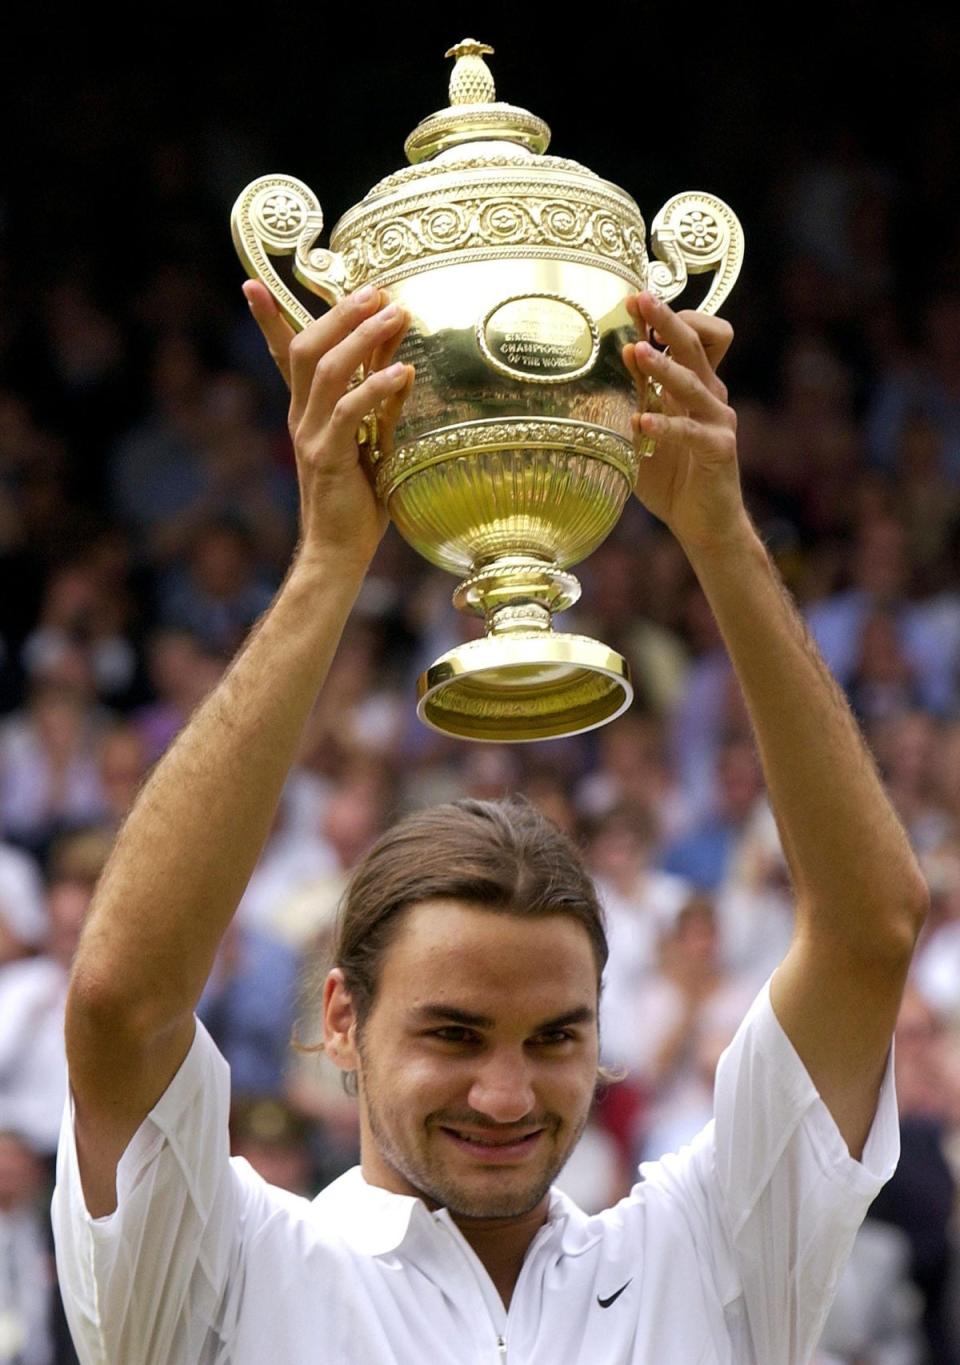 Roger Federer lifted his first grand slam title at Wimbledon in 2003 (Rebecca Naden/PA) (PA Wire)